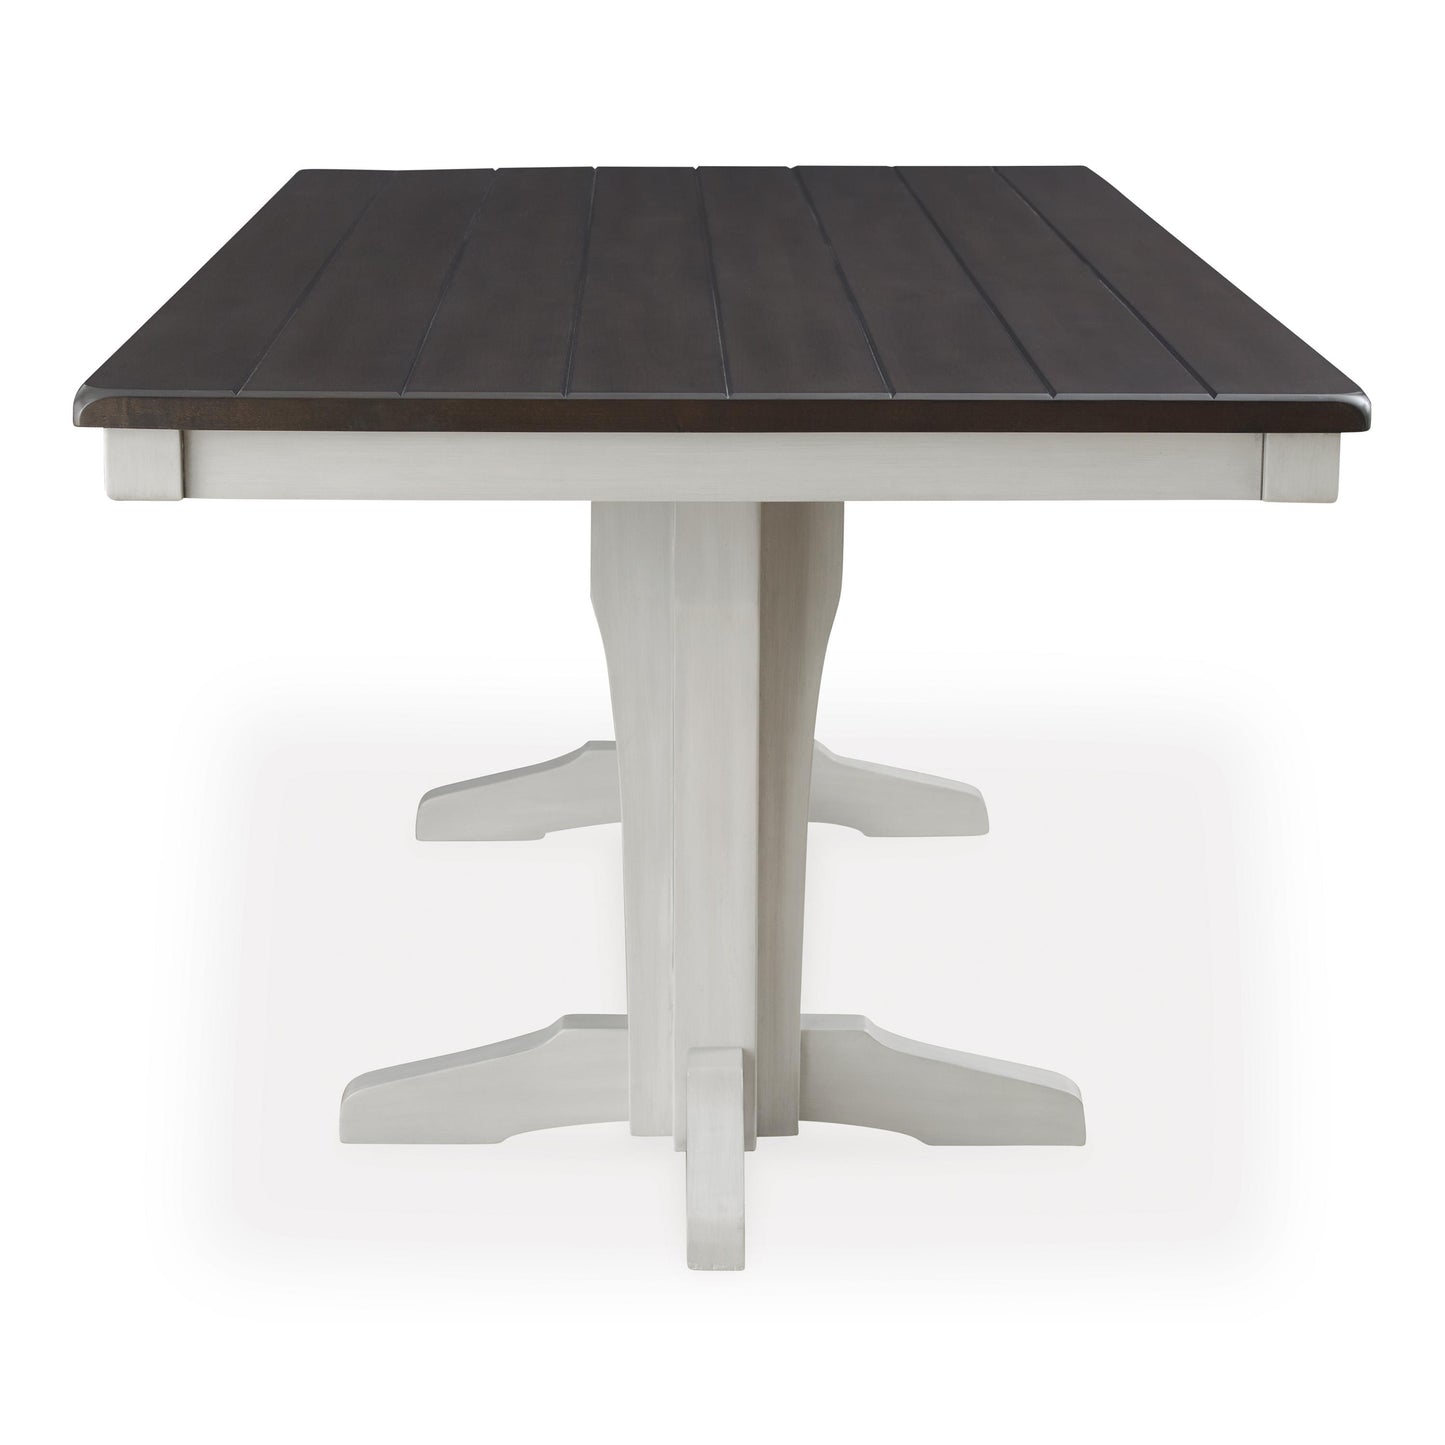 Signature Design by Ashley Darborn Dining Table D796-25B/D796-25T IMAGE 3